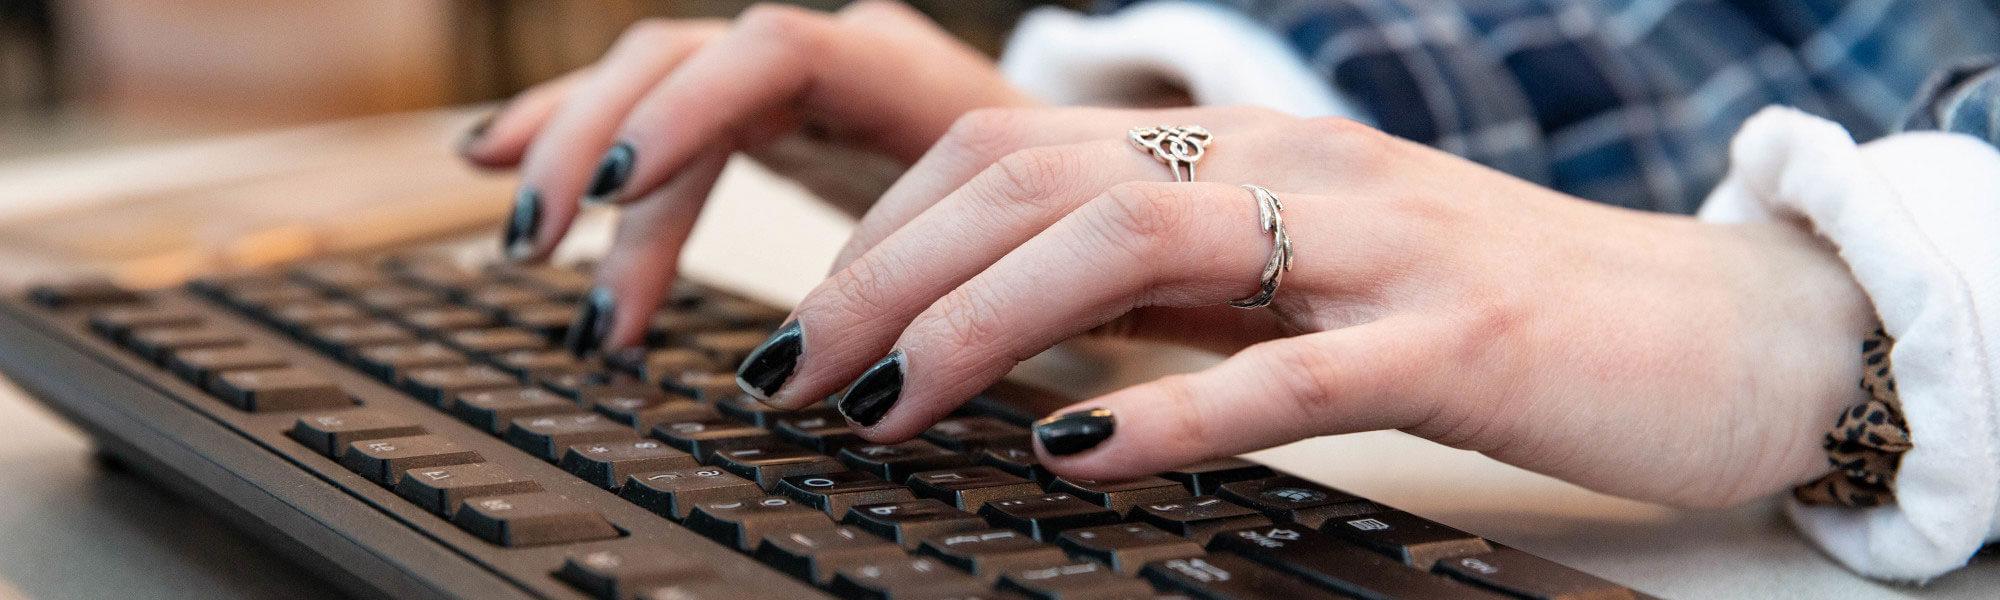 Photo of hands typing on a keyboard.